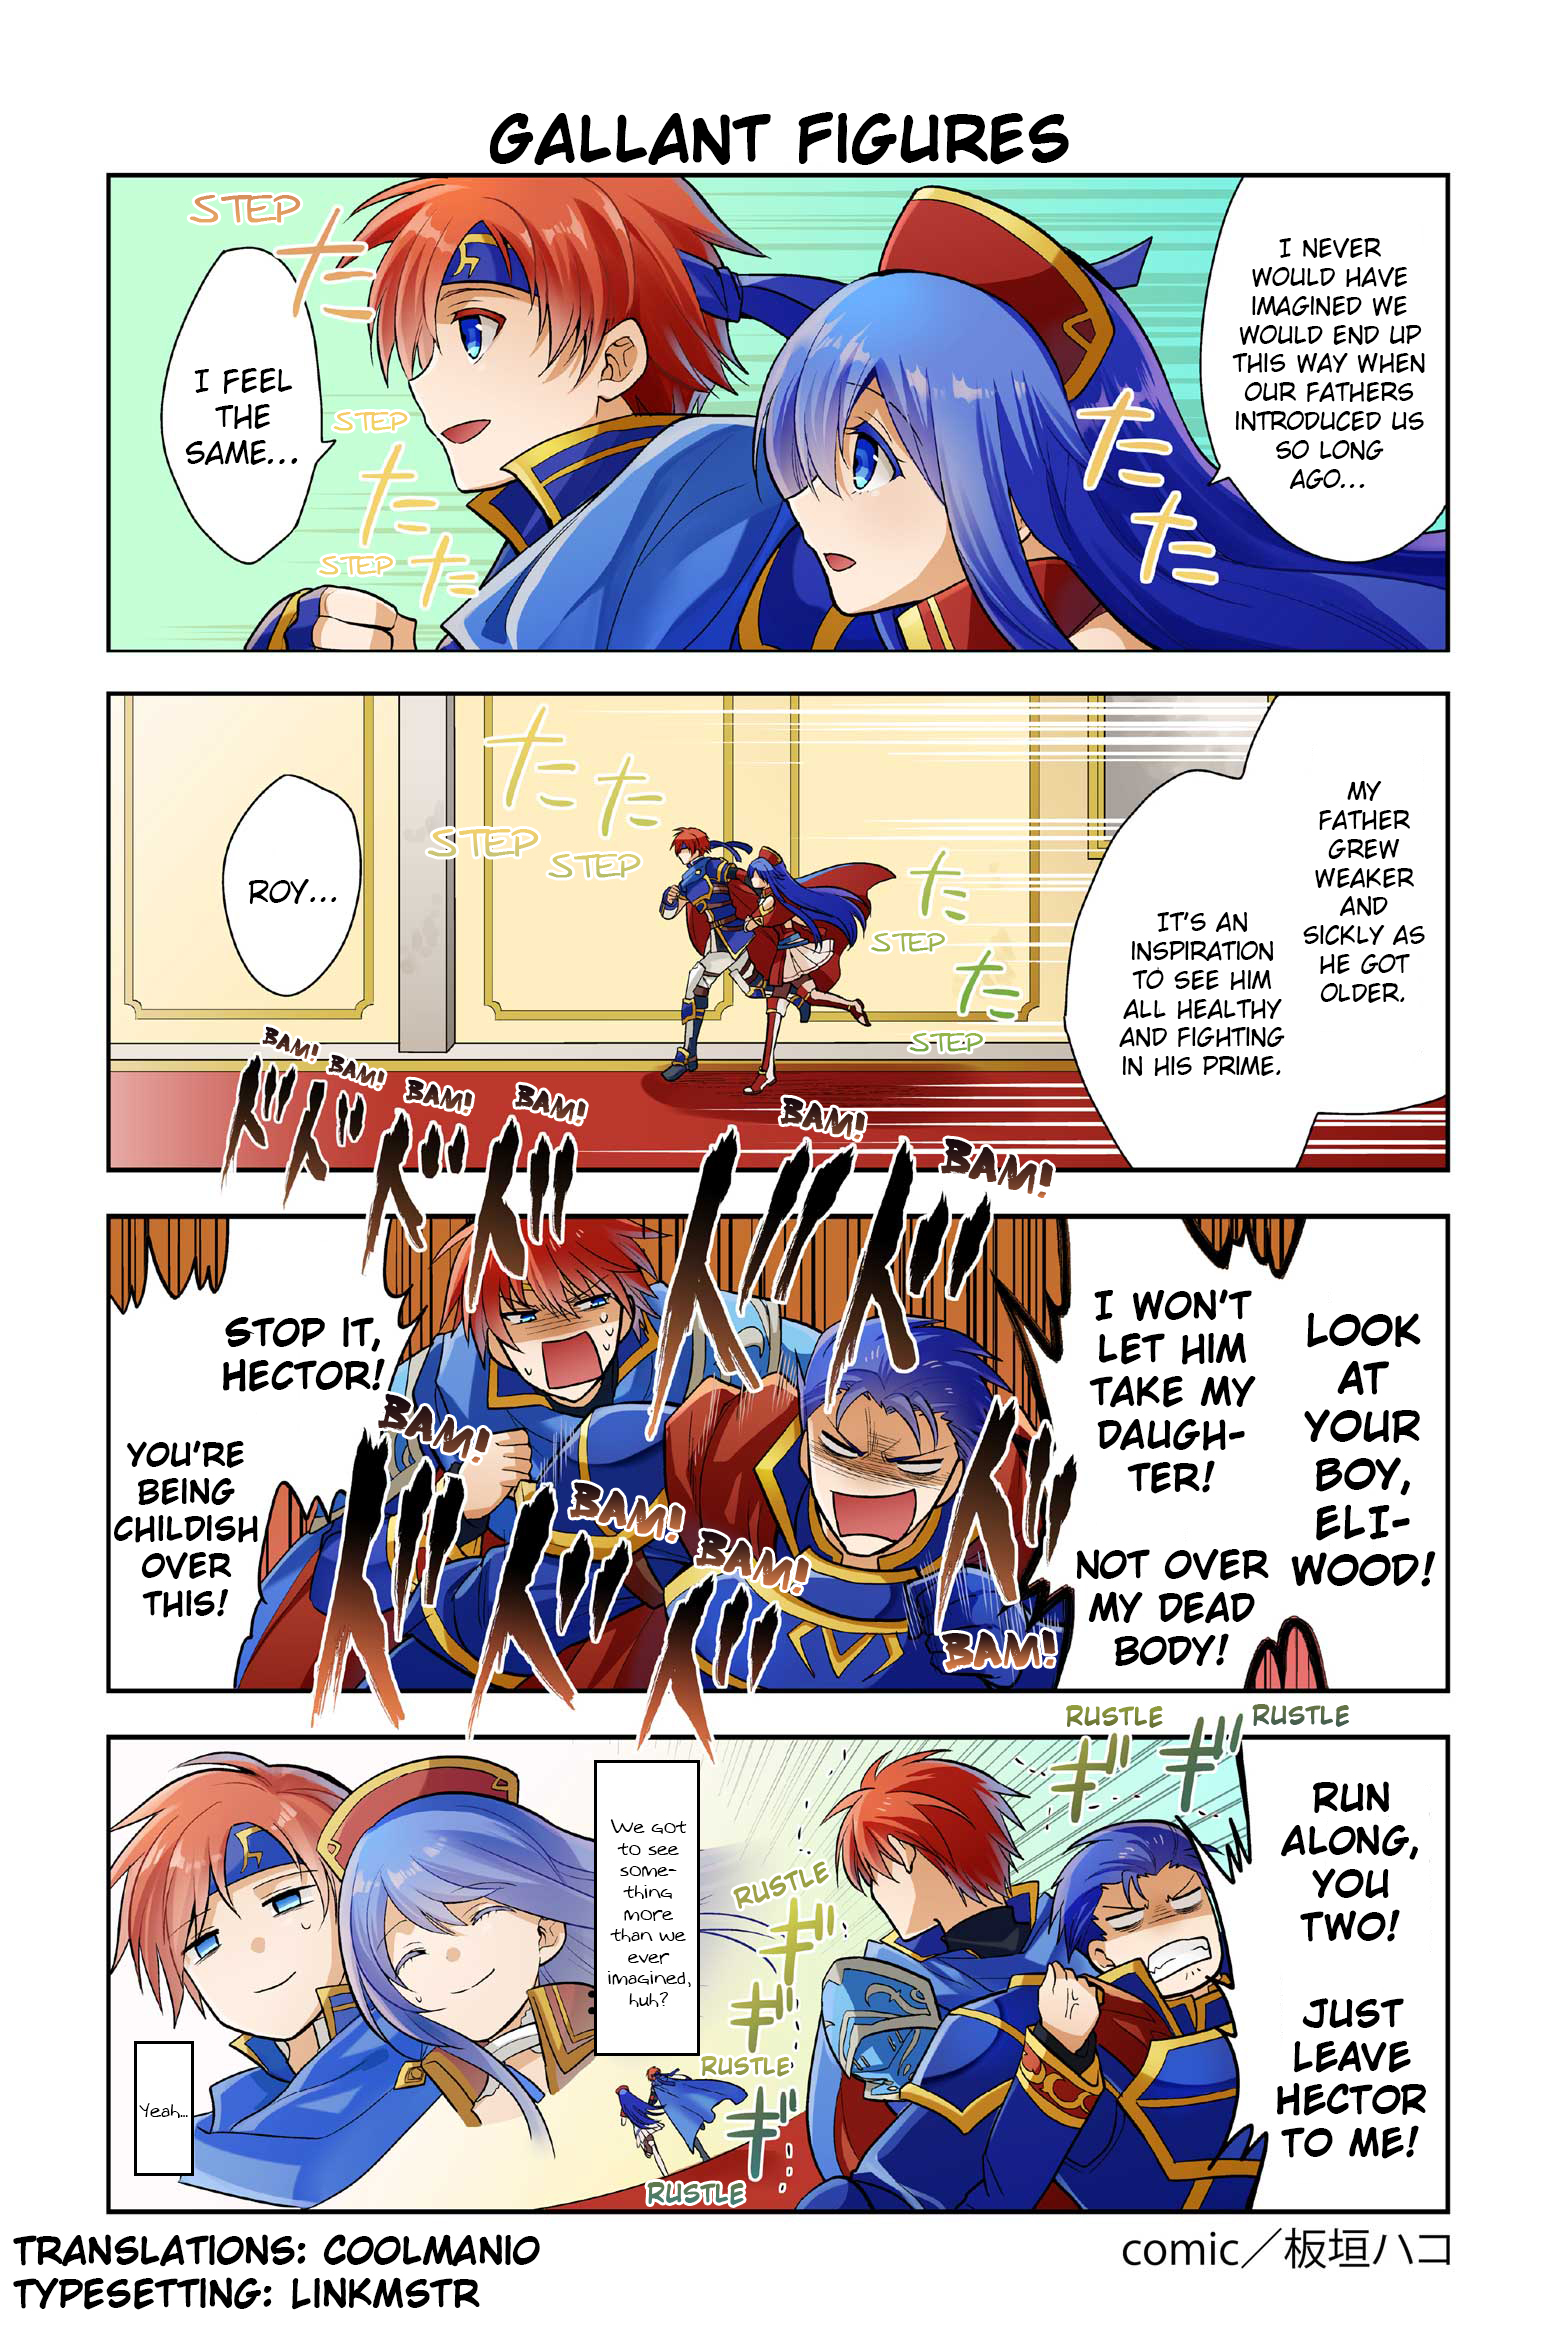 Fire Emblem Heroes Daily Lives of the Heroes Chapter 67: Gallant Figures